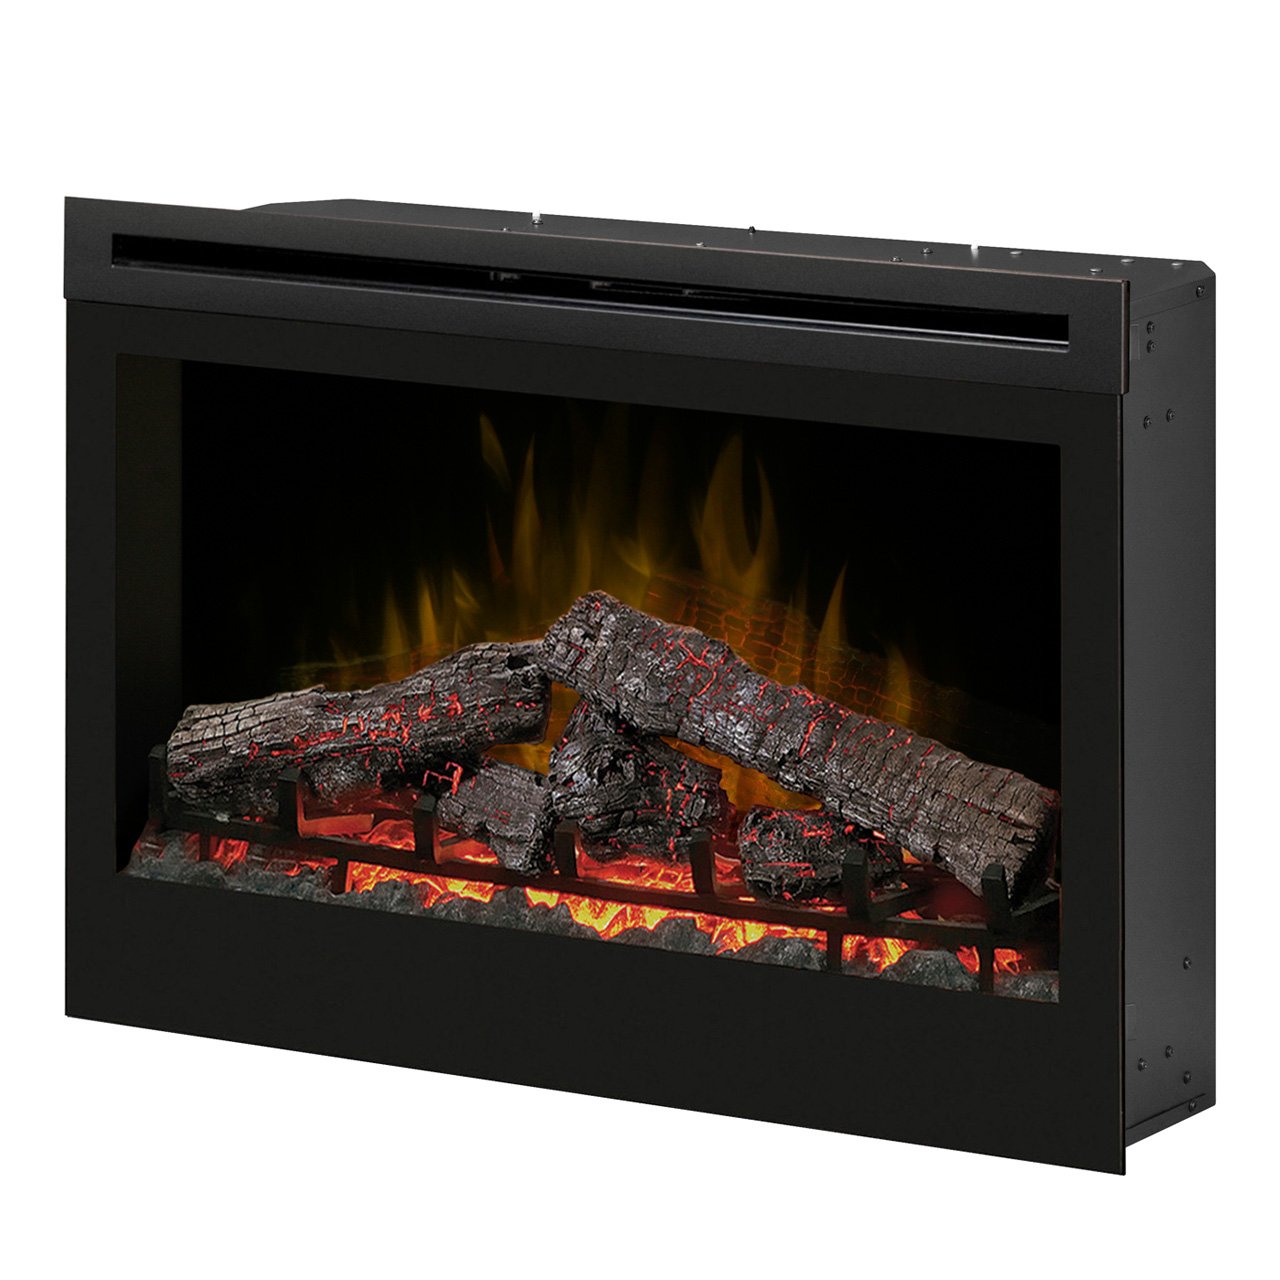 Box Fireplace Inspirational Dimplex Df3033st 33 Inch Self Trimming Electric Fireplace Insert